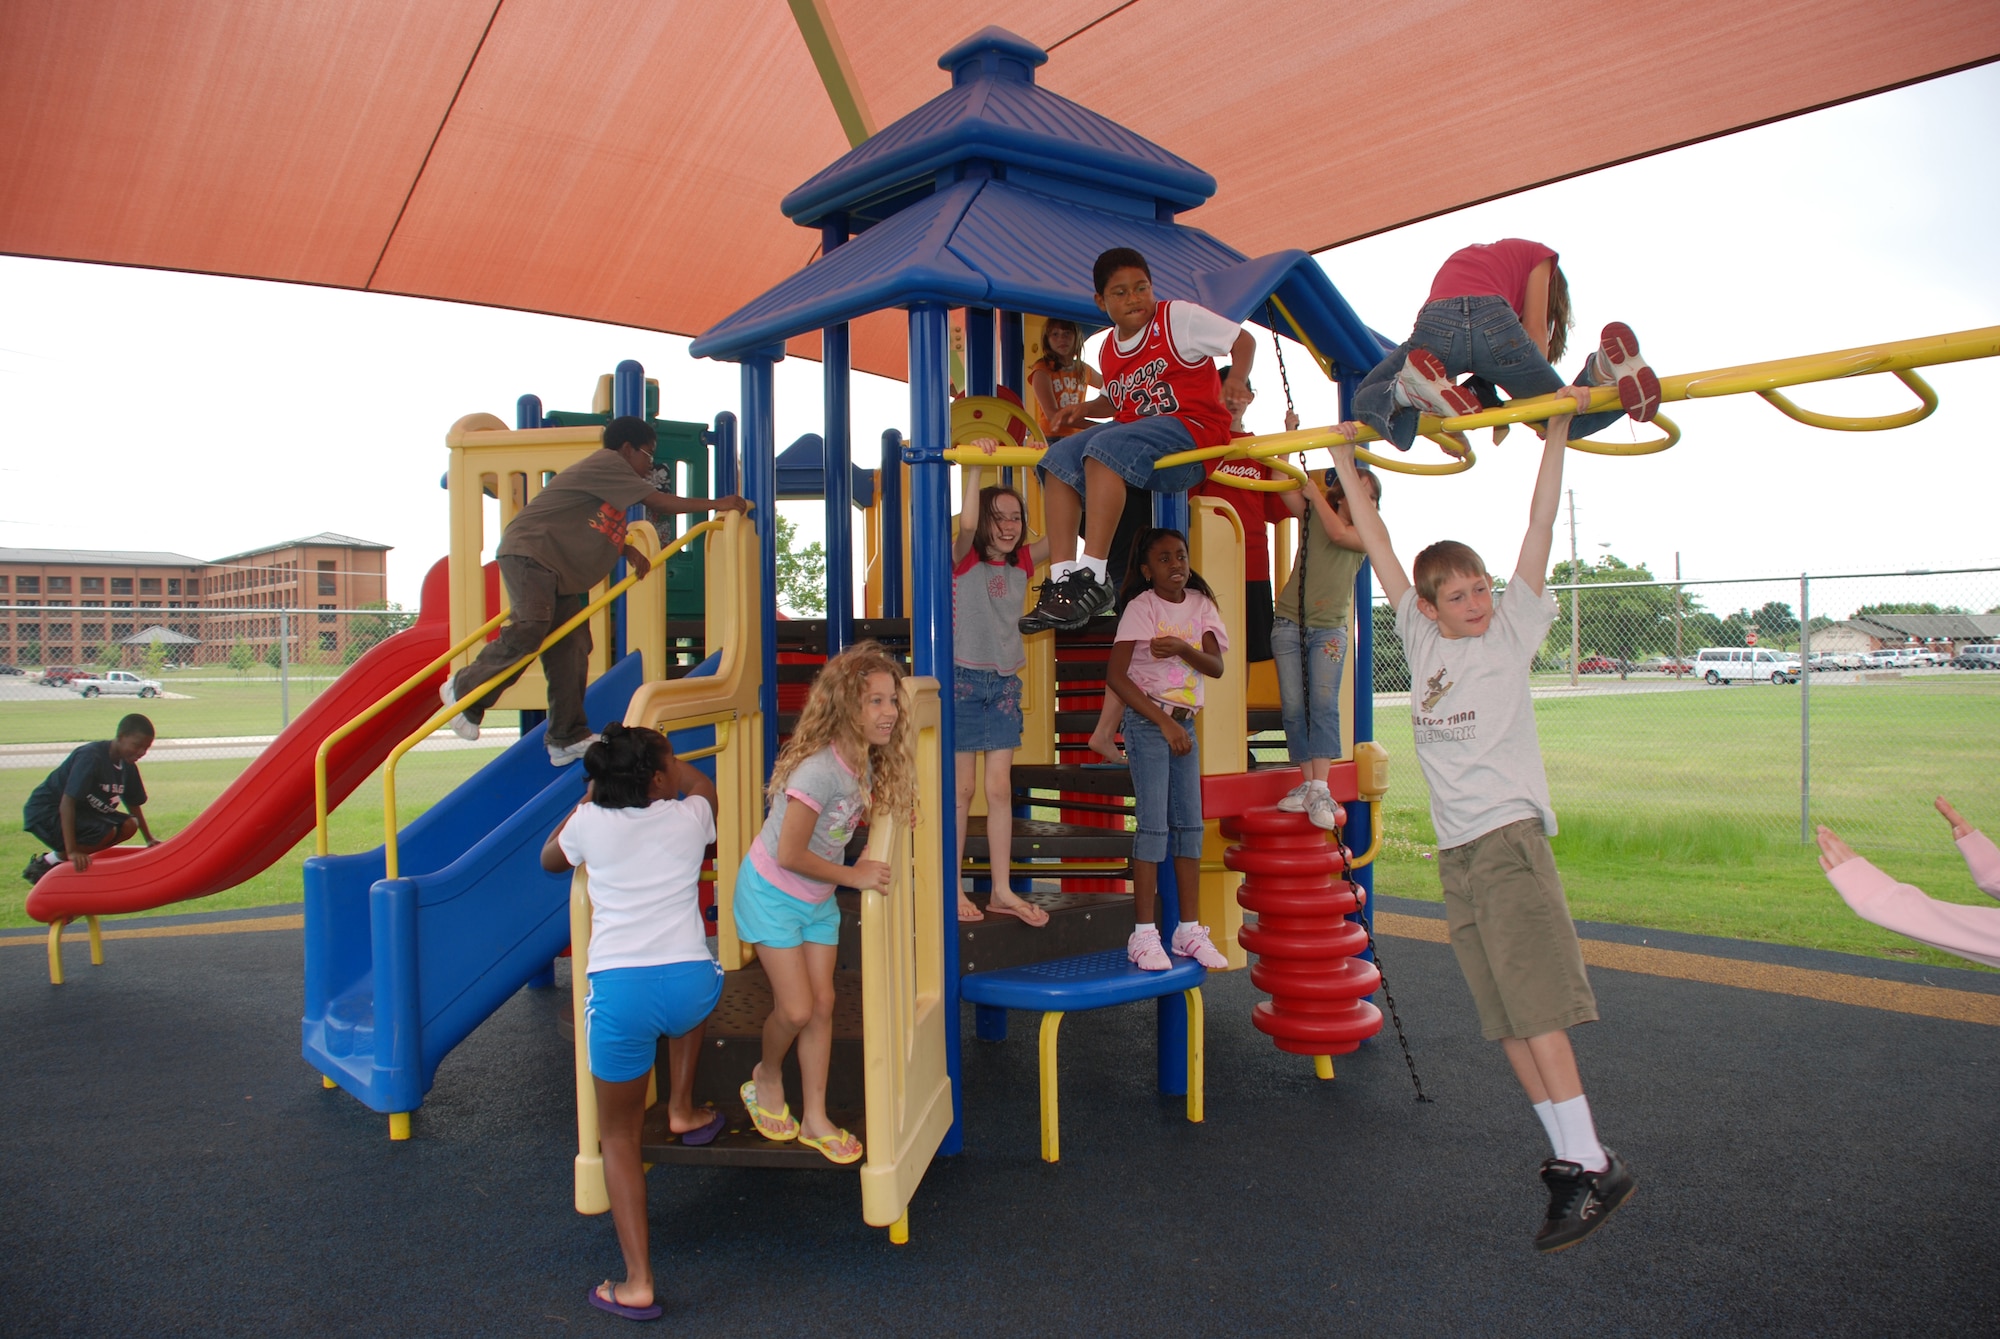 Children attending the Madrigal Youth Center's summer camp play outside on the playground June 4. (U.S. Air Force photo/Airman 1st Class Jacob Corbin)